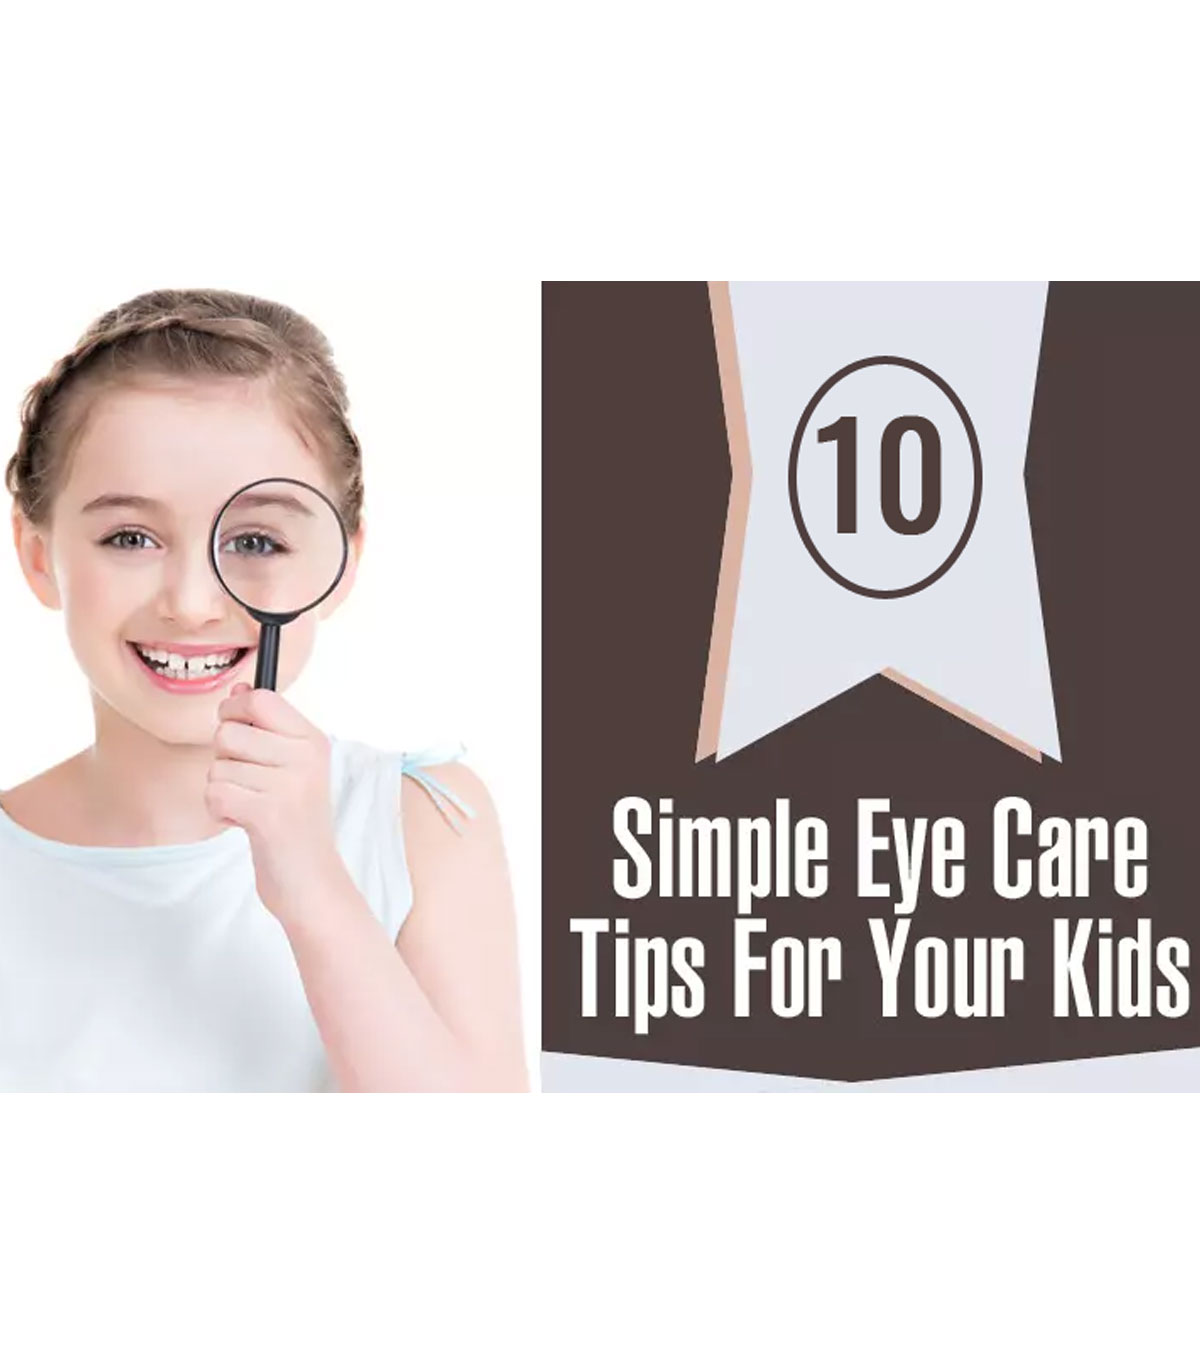 10 Simple Eye Care Tips For Kids And Ways To Improve Eyesight